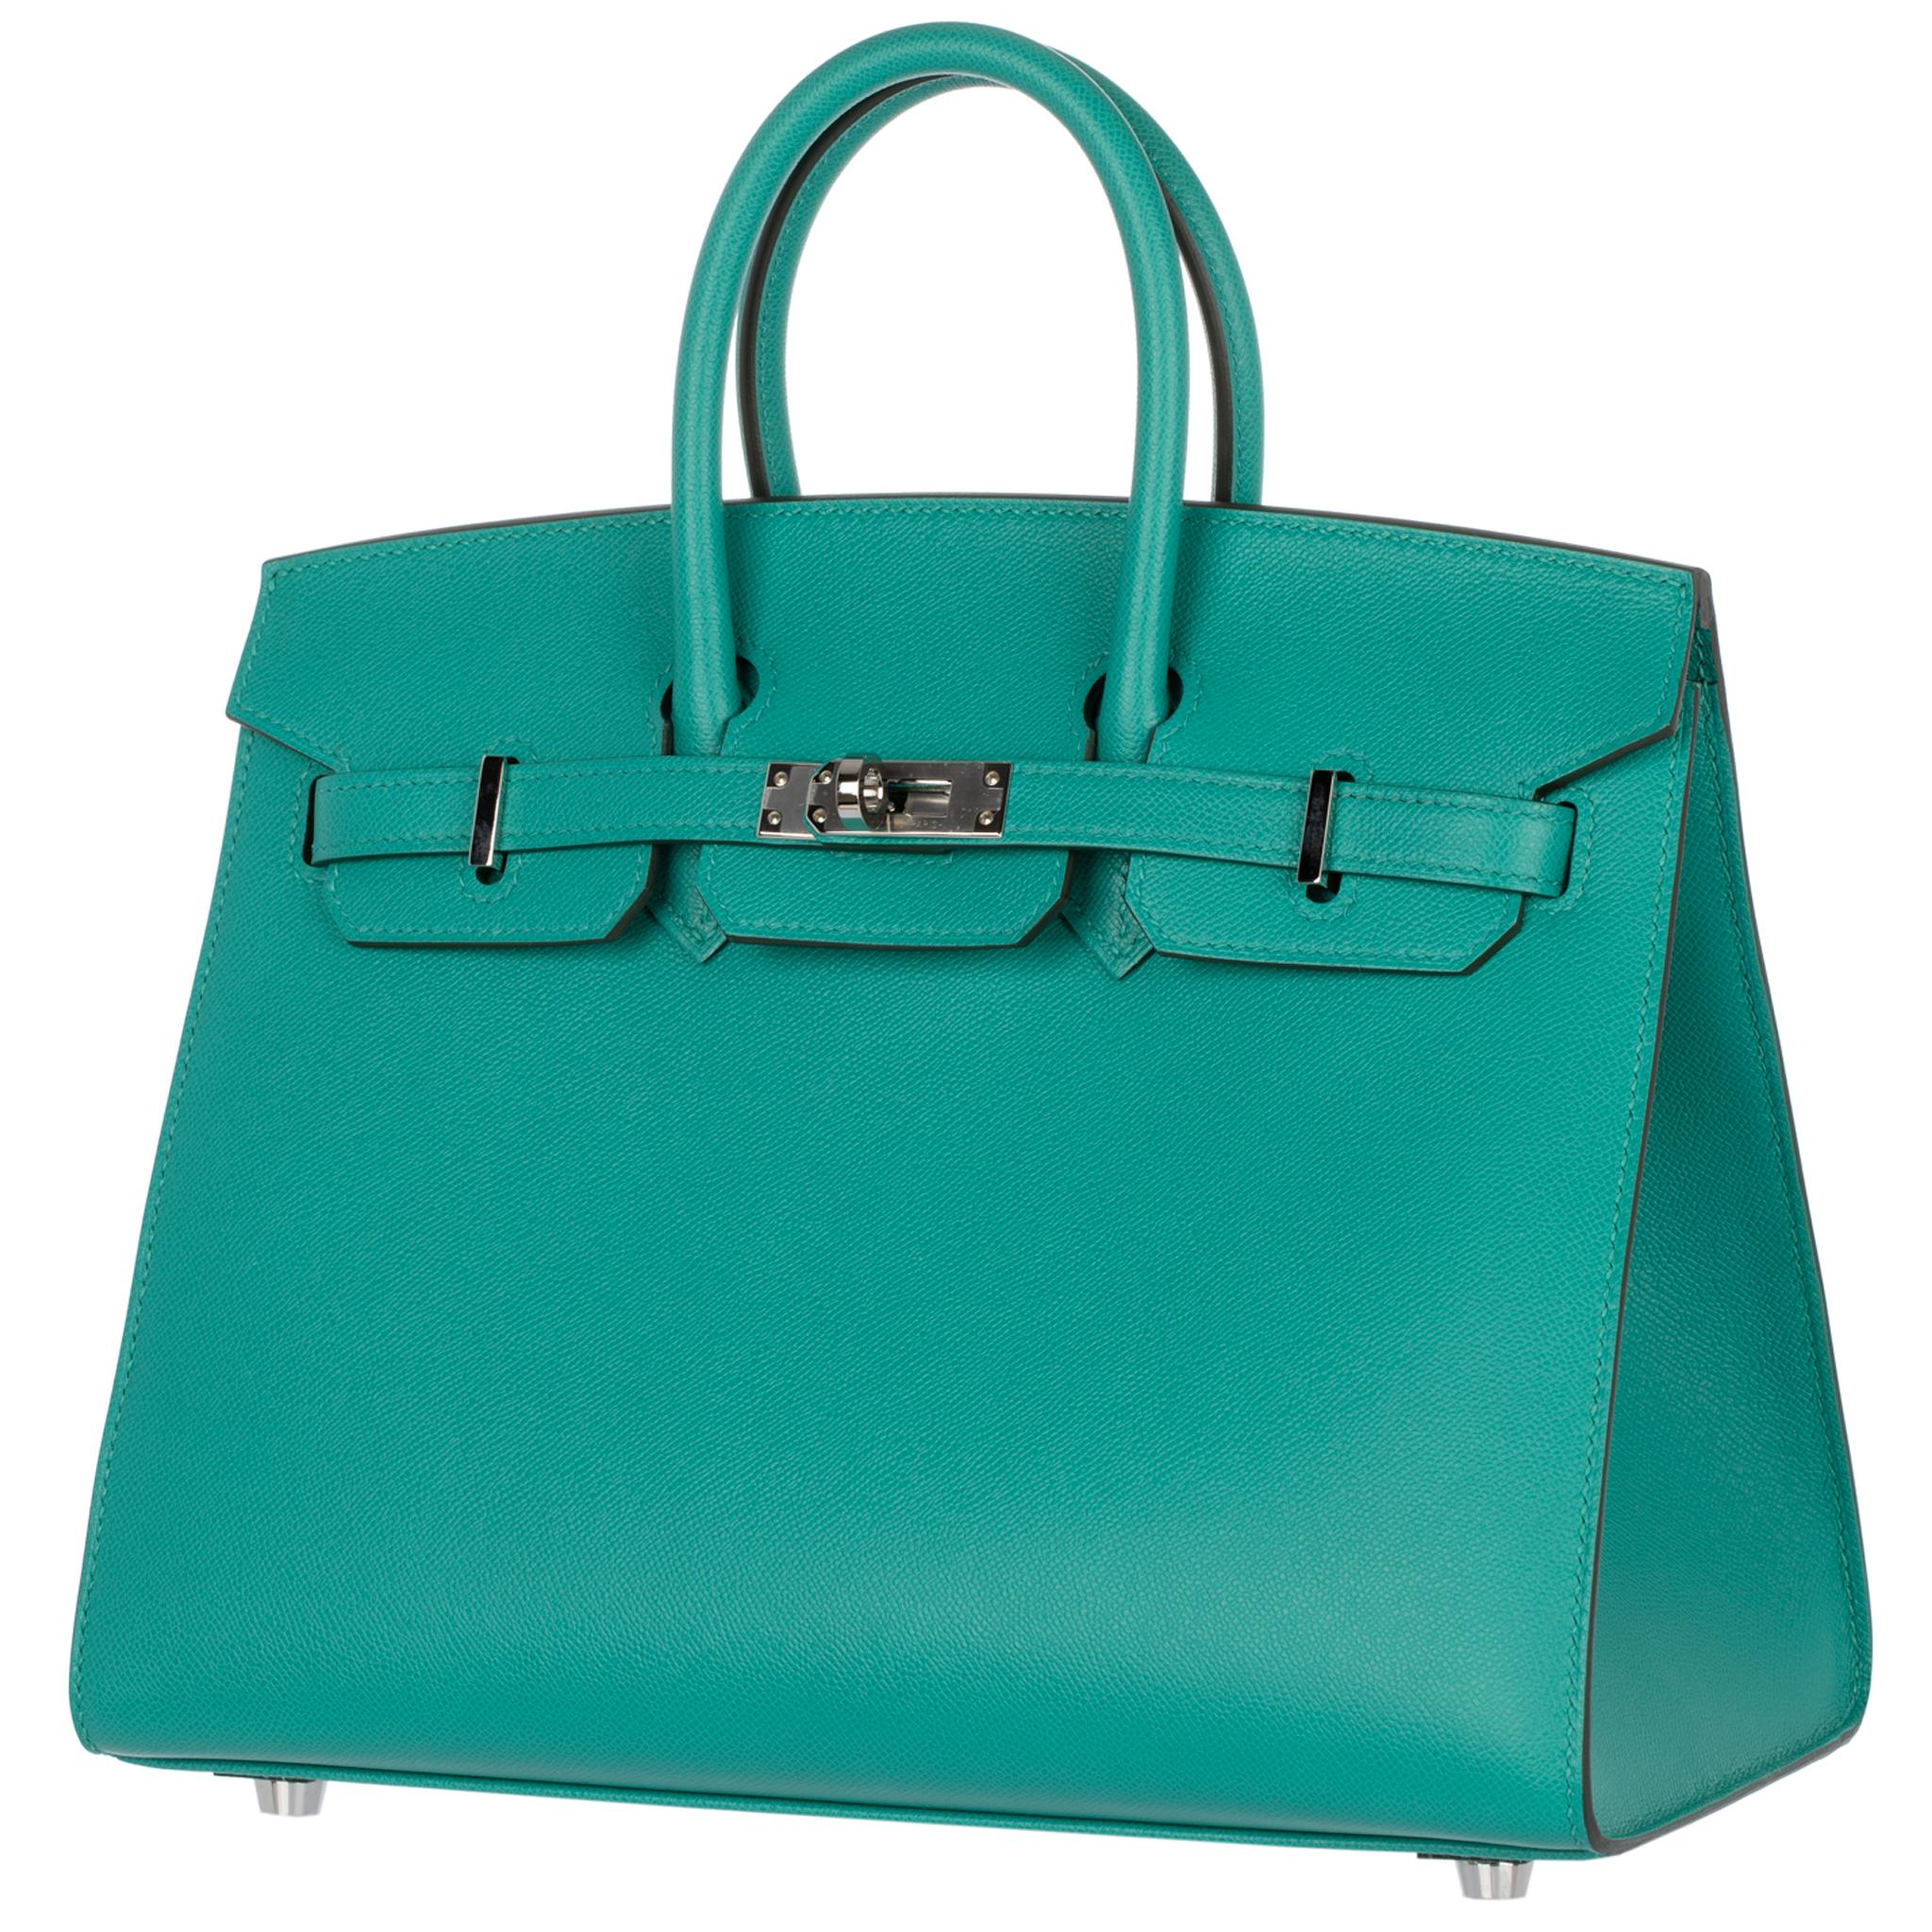 Hermes Birkin 25cm Sellier Vert Verone Veau Madame Leather Palladium Hardware In New Condition For Sale In Sydney, New South Wales